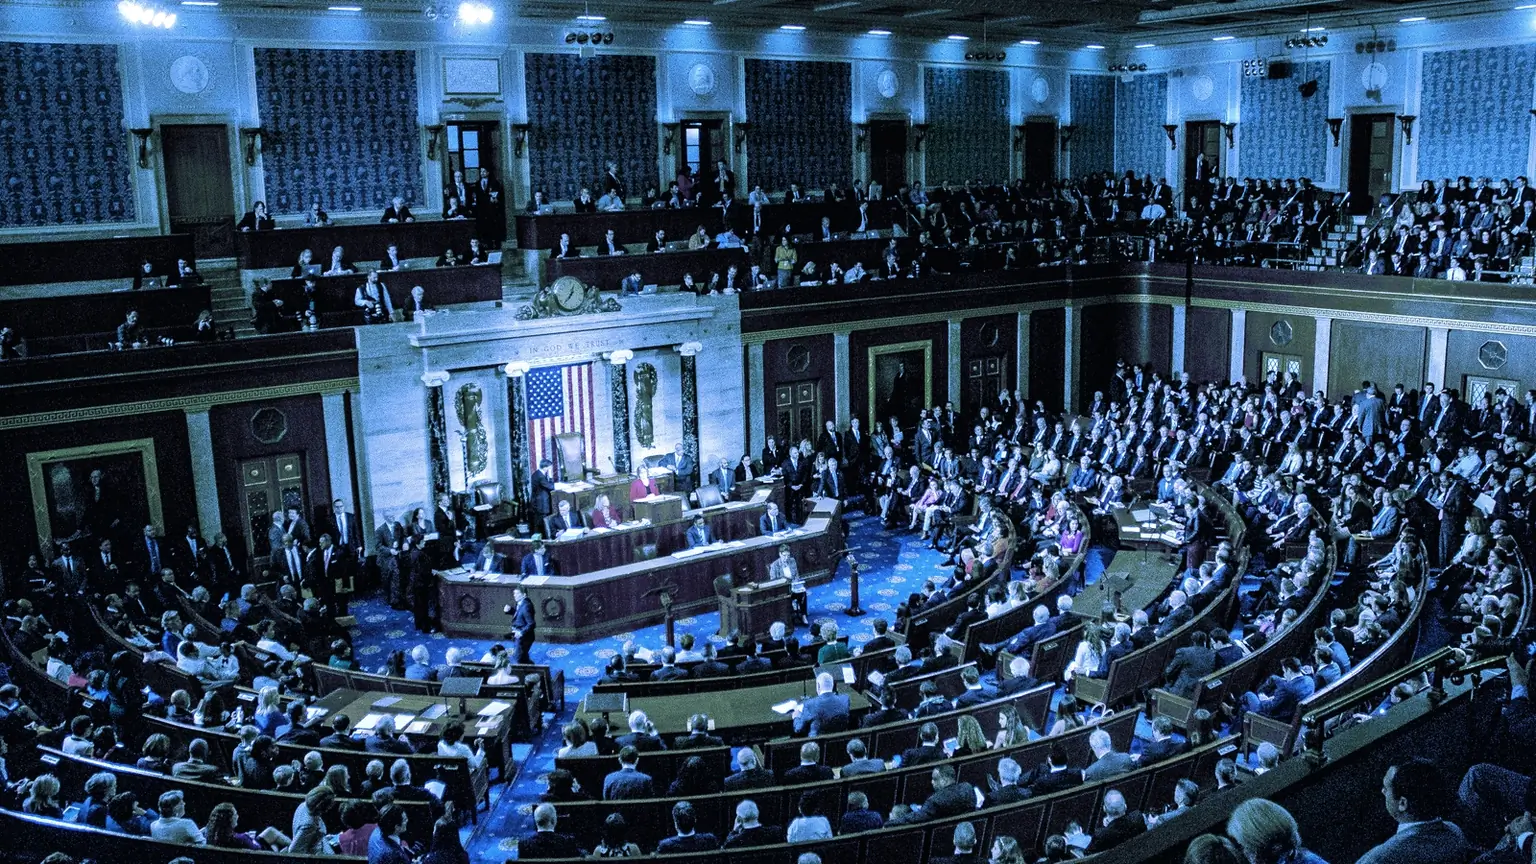 The U.S. Senate is the upper chamber of the American congress. Image: Shutterstock